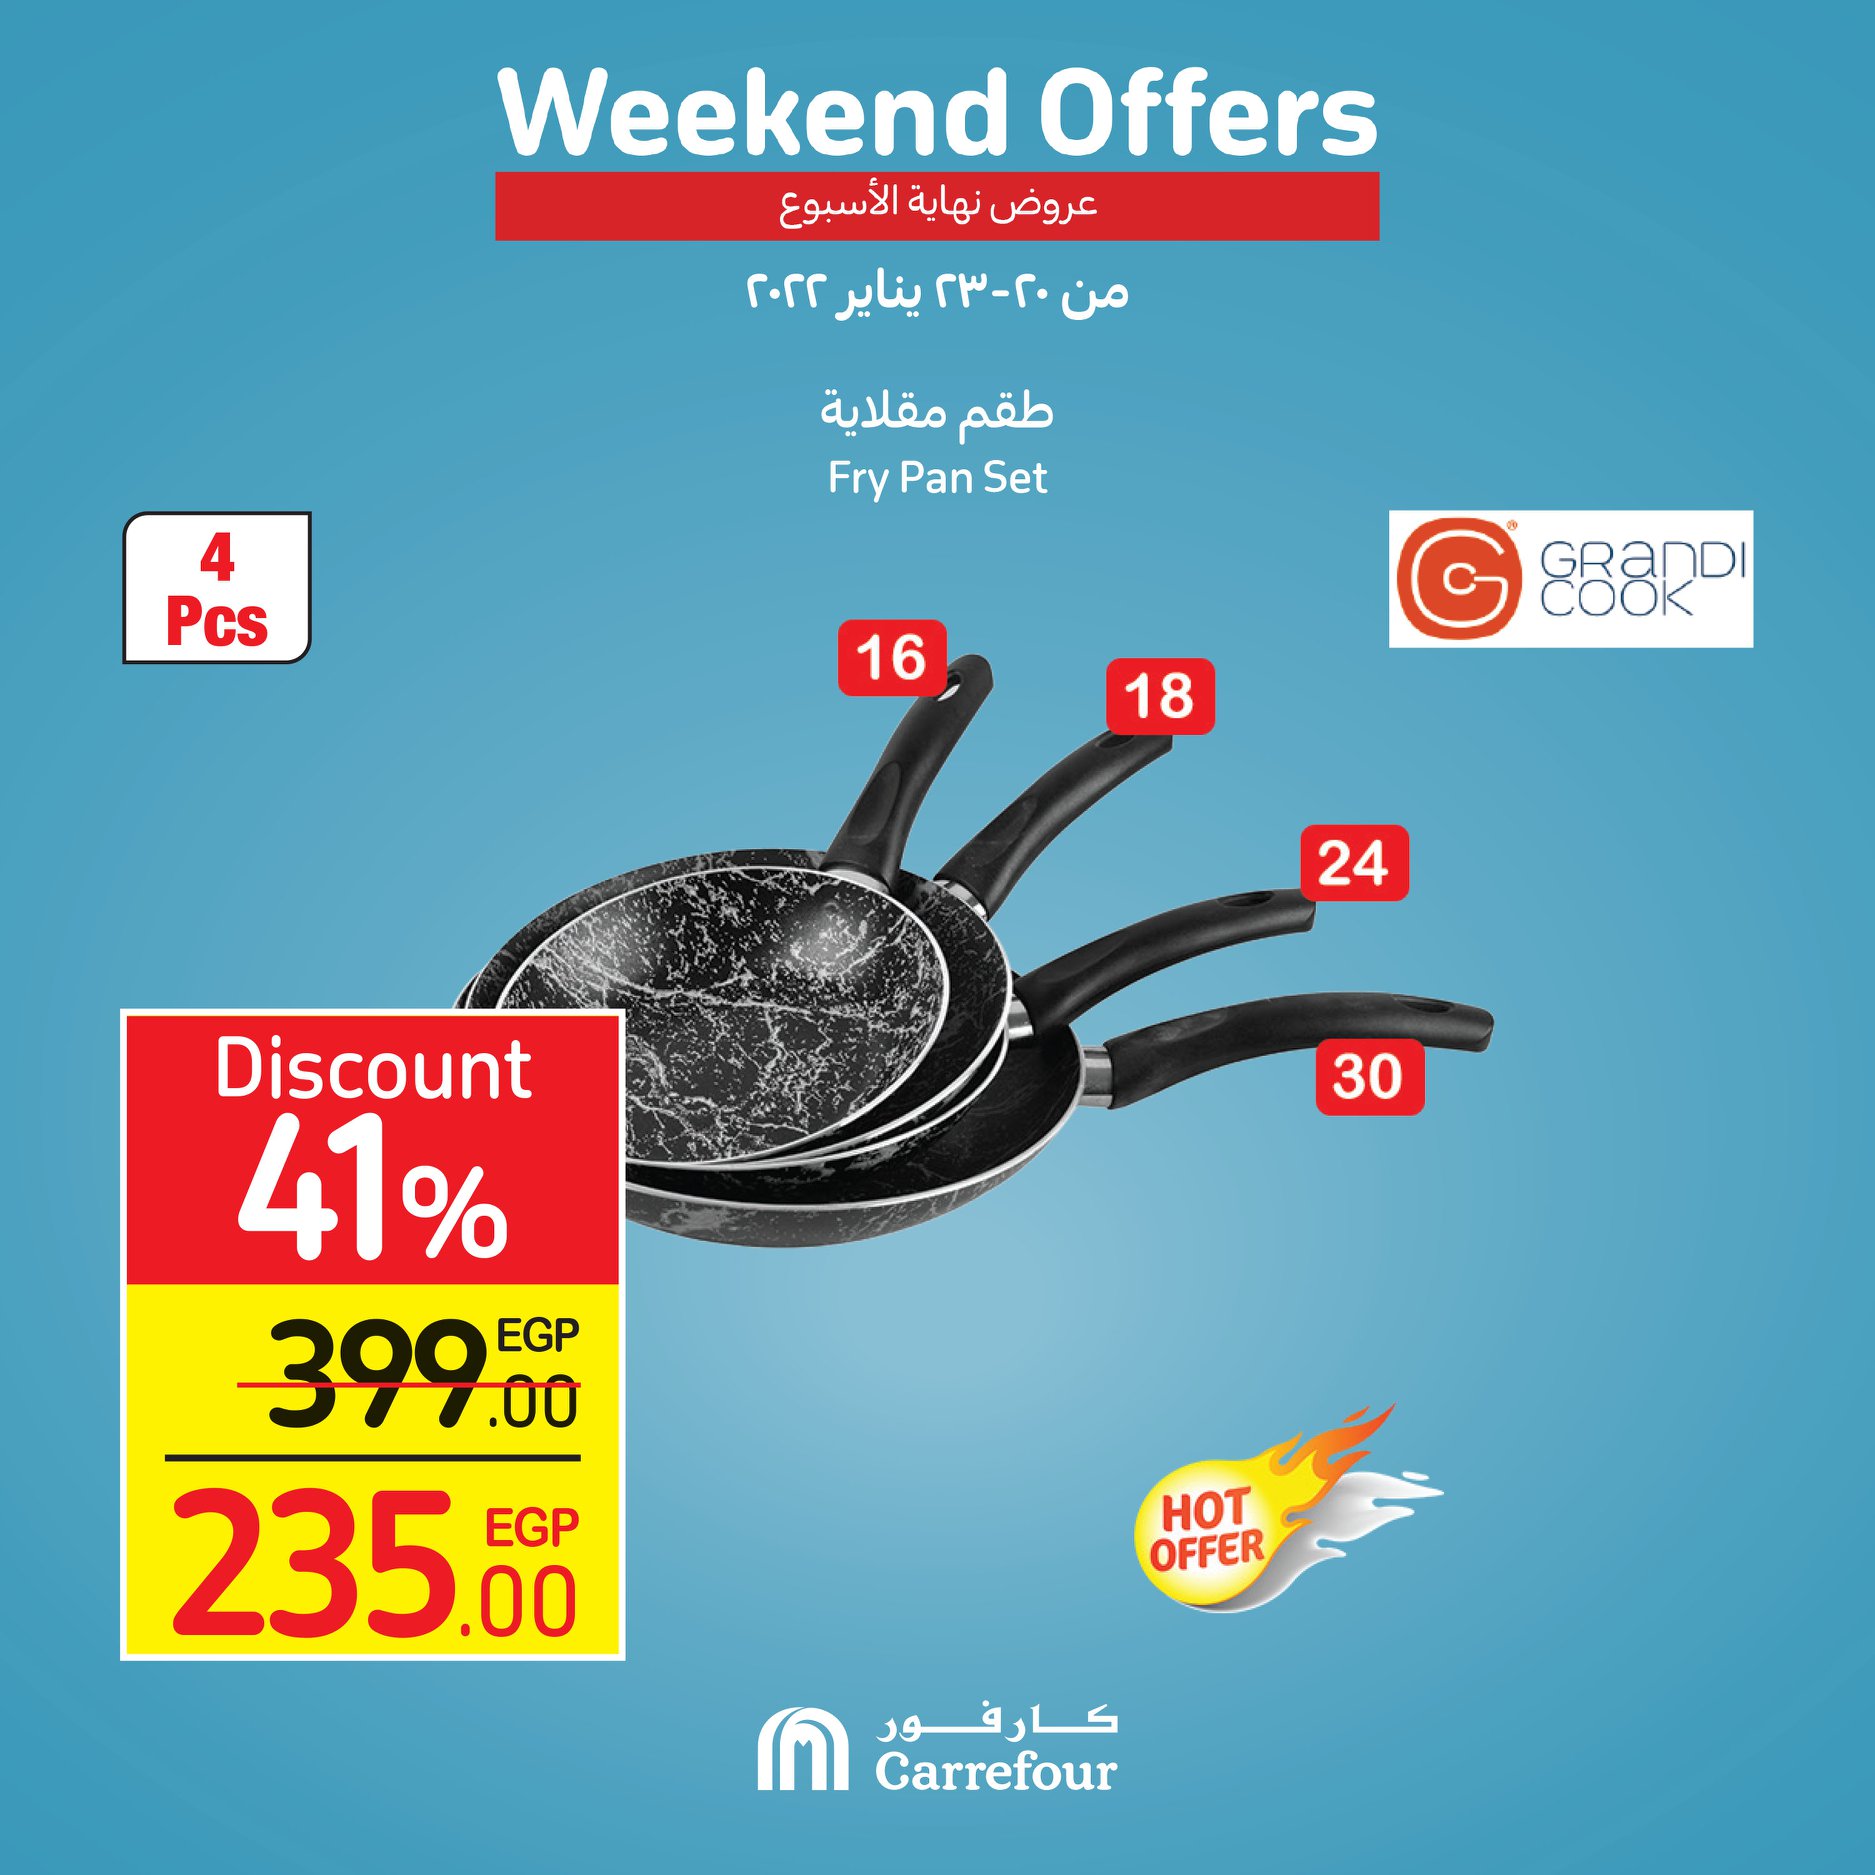 Watch Carrefour's gifts and surprises in the week and prices at dirt cheap 20